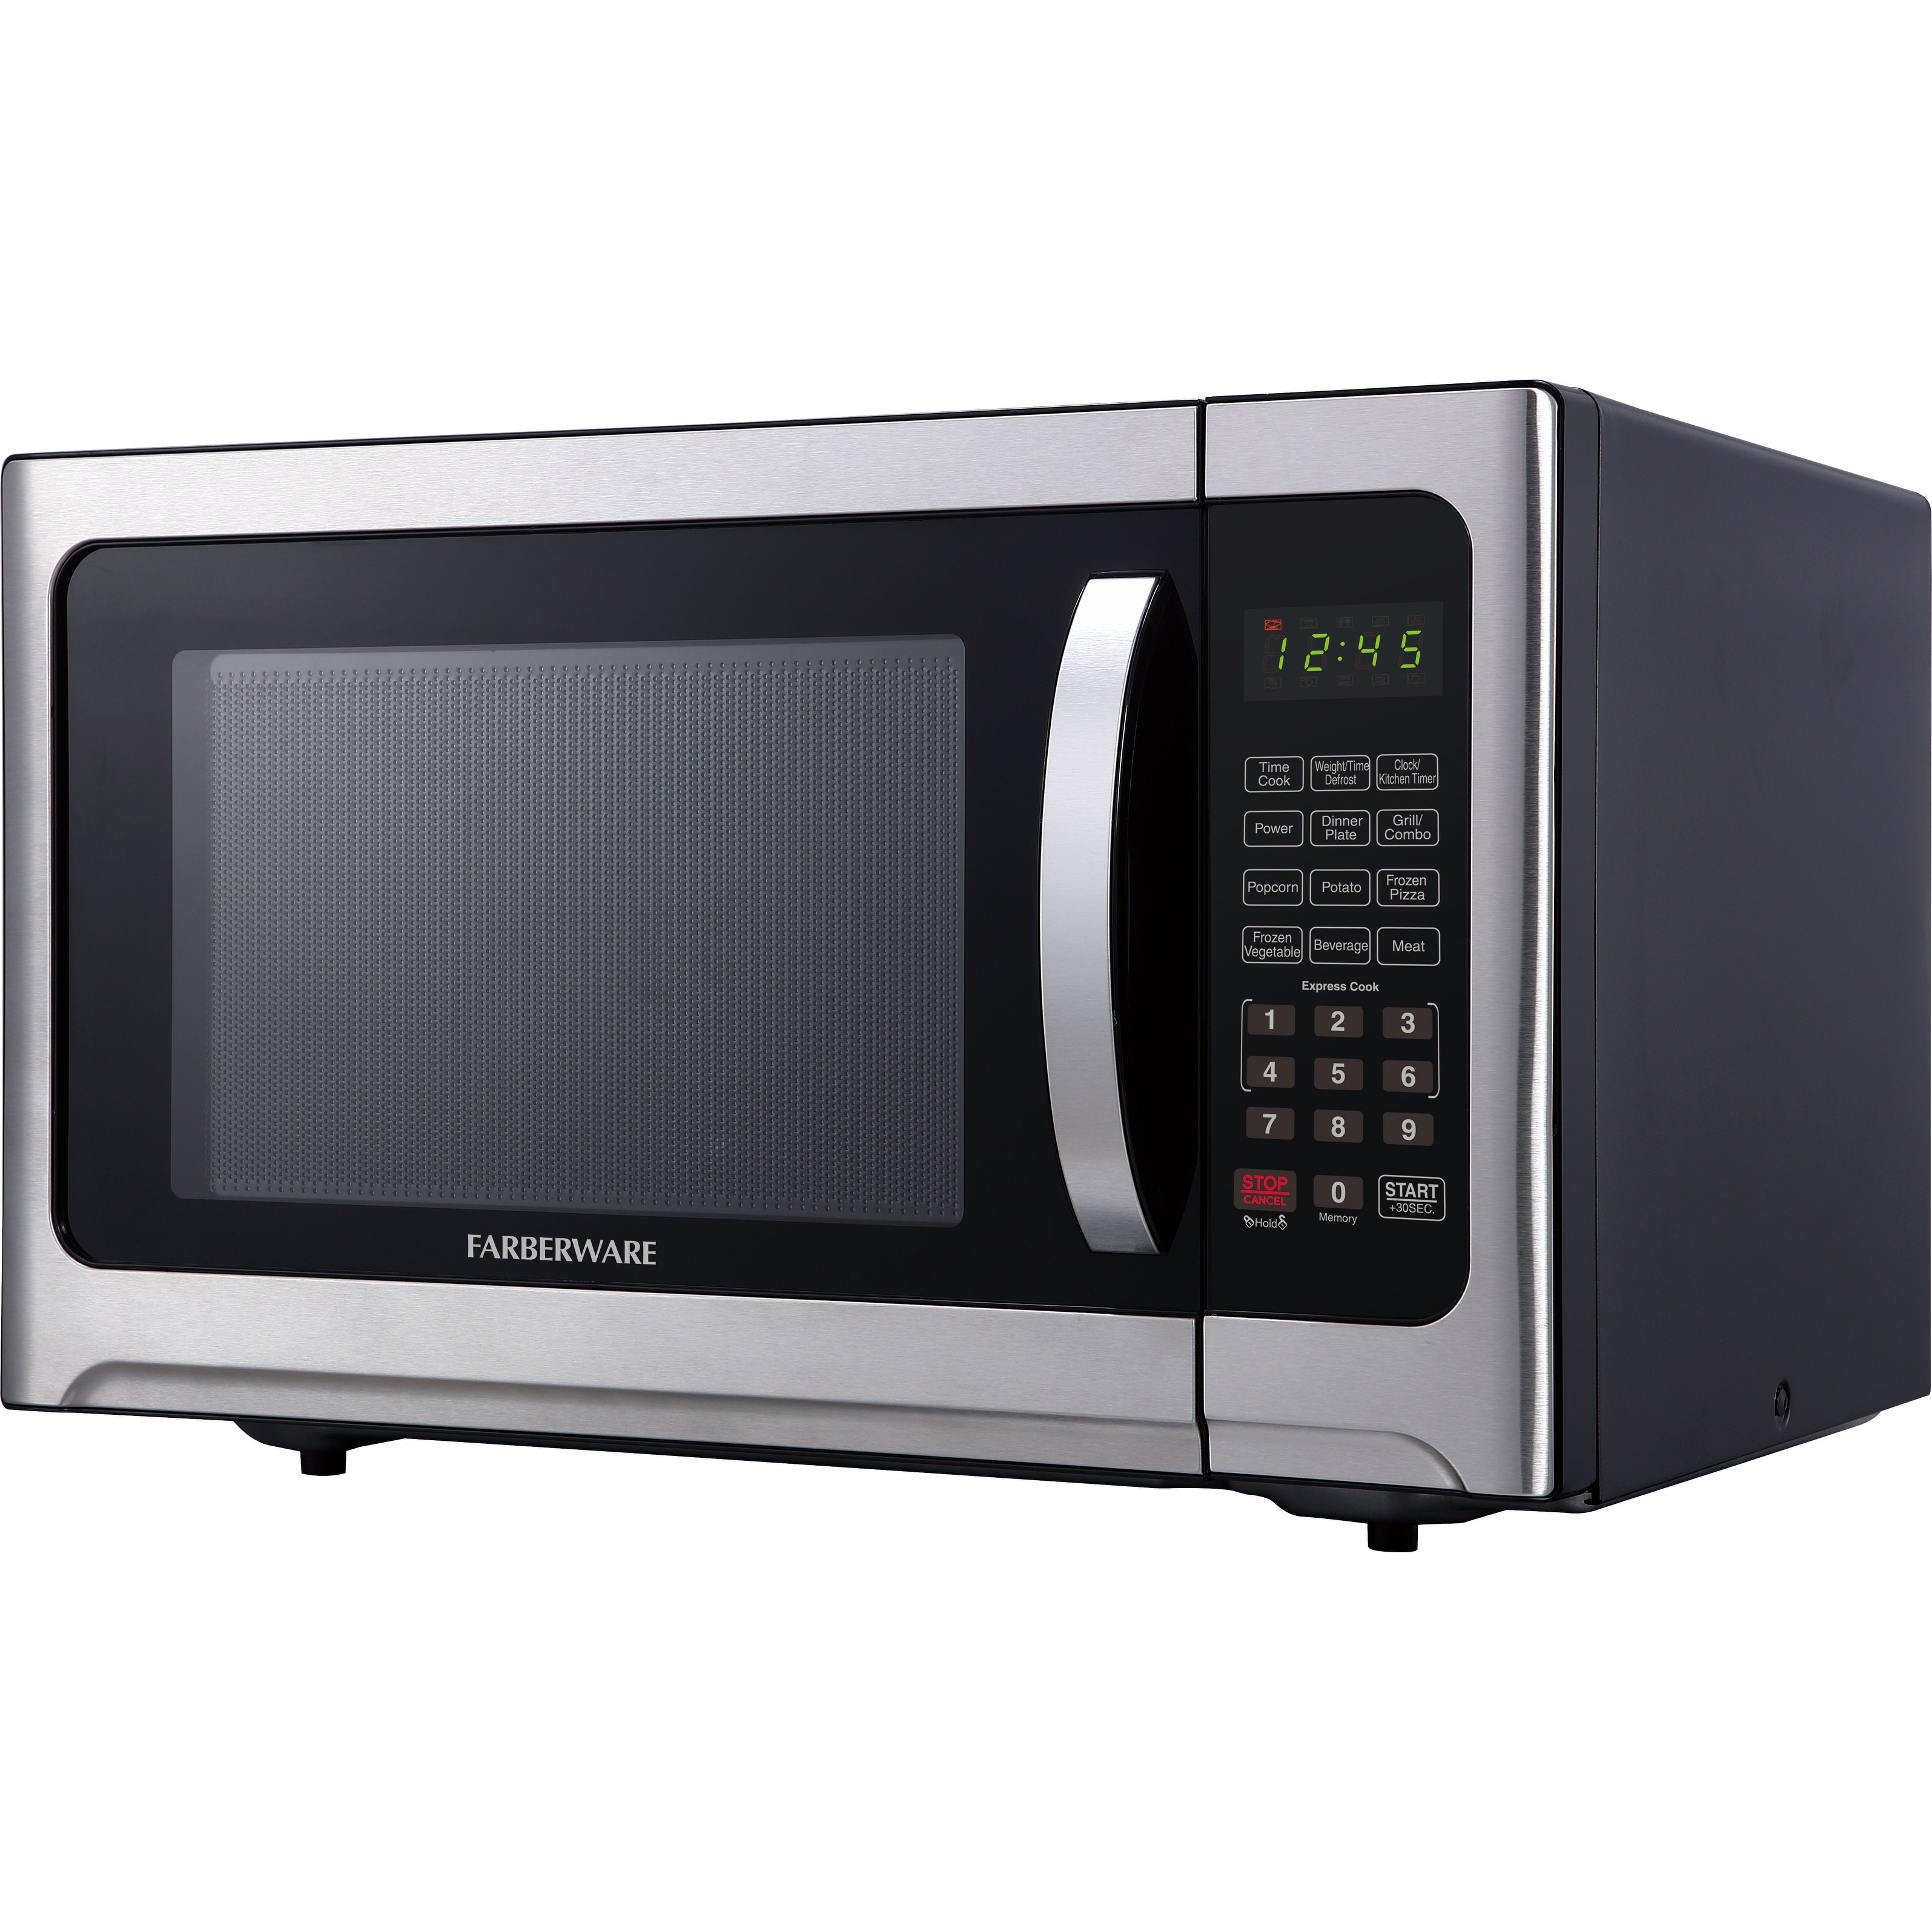 https://ak1.ostkcdn.com/images/products/is/images/direct/36987840a4a71f97baccd1b60c8dd8a30c692808/Professional-1.2-Cu.Ft.-Microwave-and-Grill-Oven.jpg